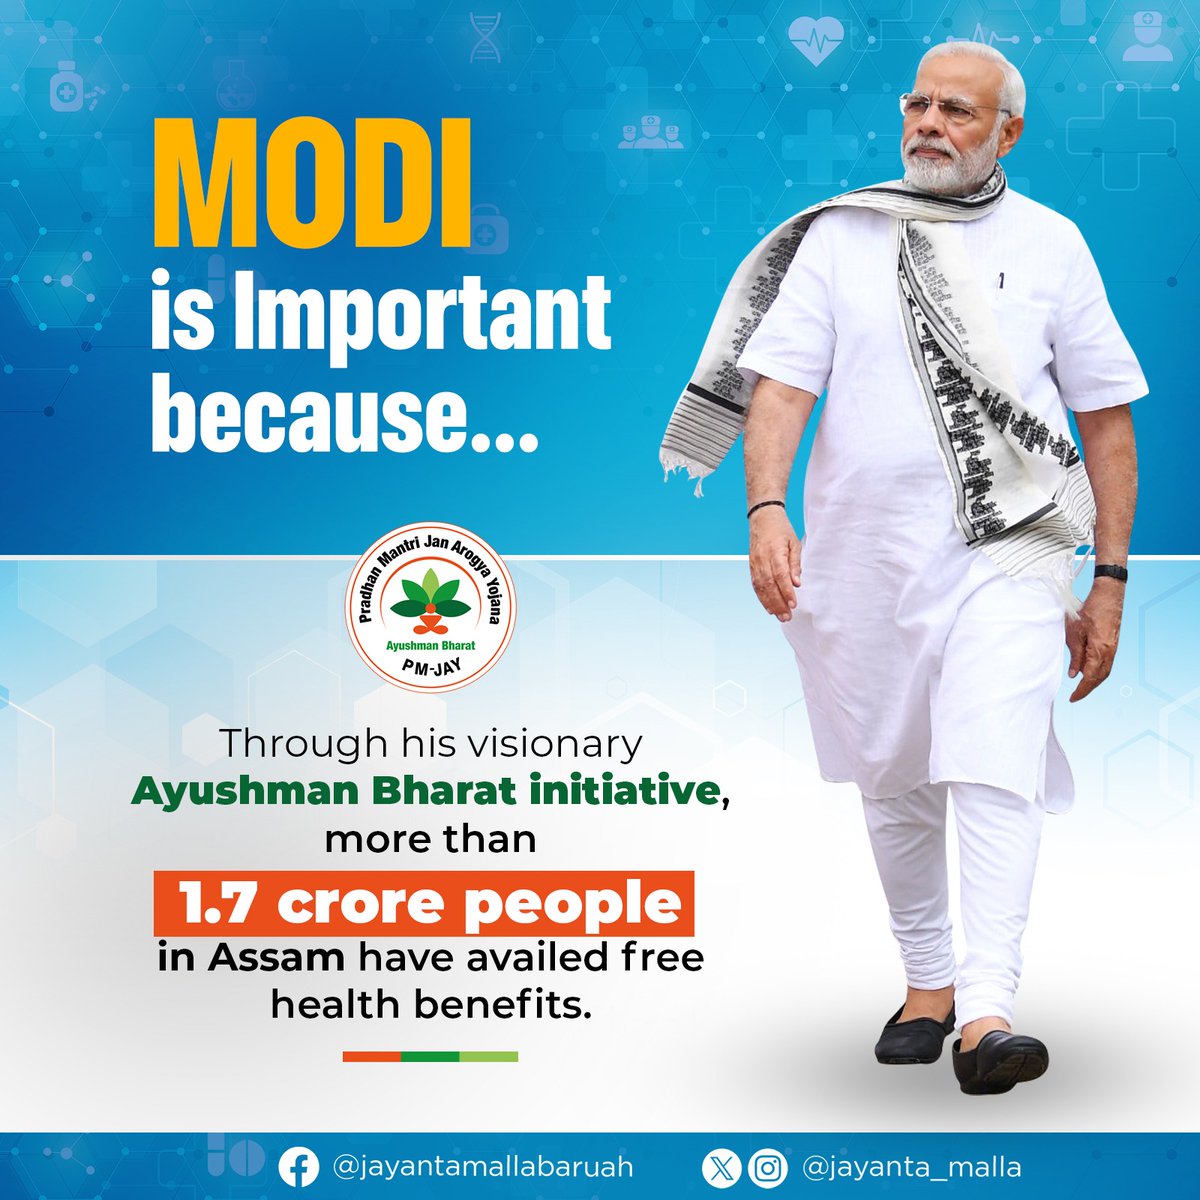 Modi is important because...